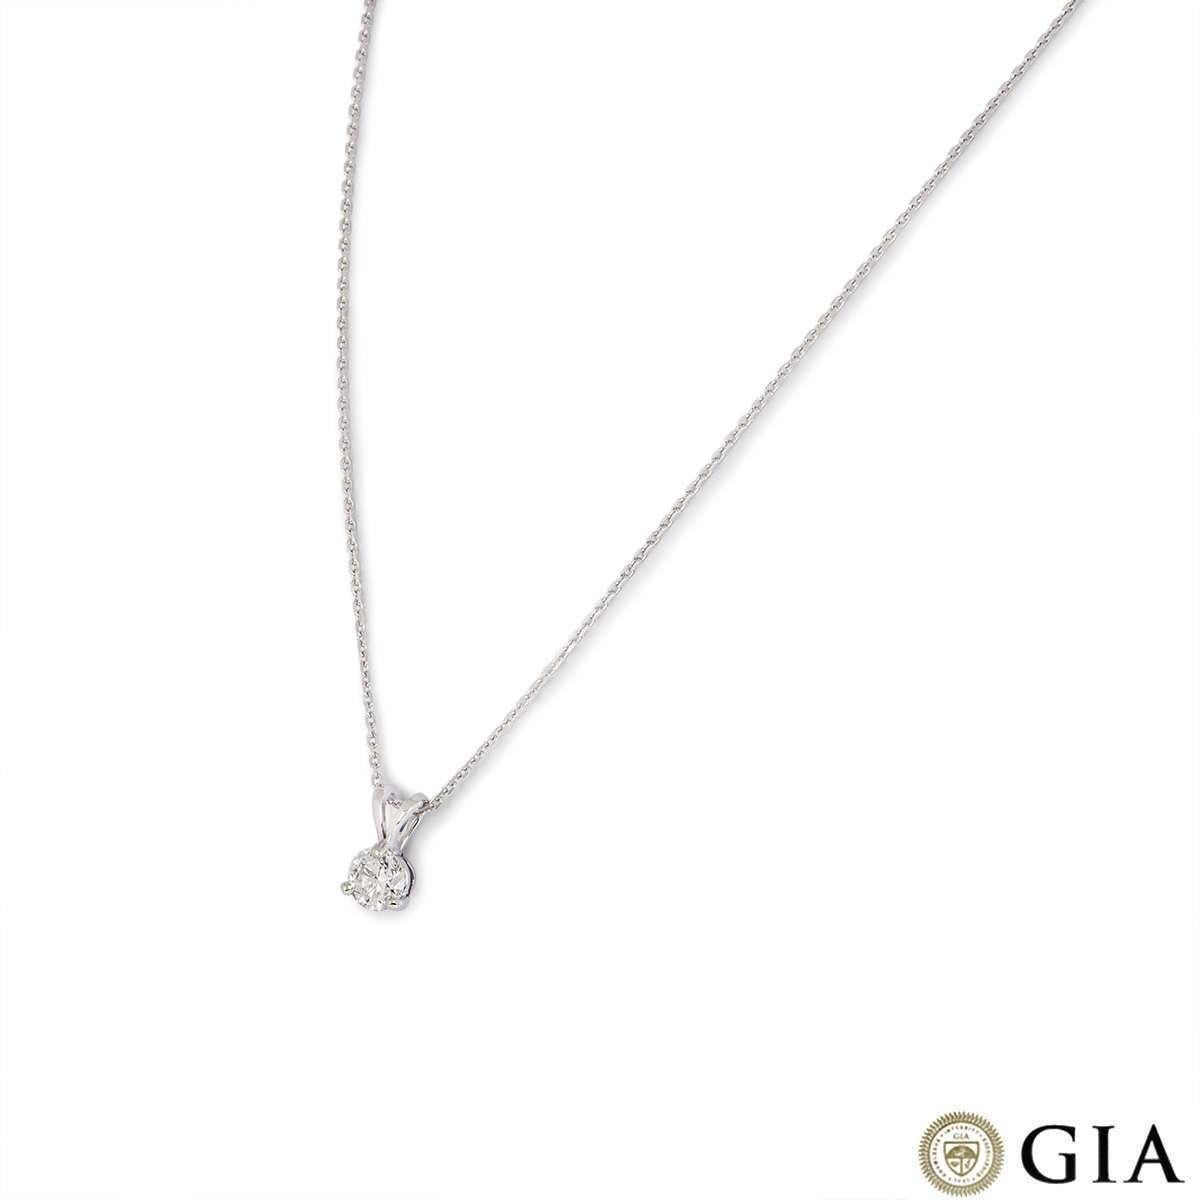 A diamond pendant in platinum. The pendant is set with a single round brilliant cut diamond weighing 0.70ct, G colour and VS1 clarity. The pendant comes on an 18 inch trace chain, complete with a boltring clasp. The necklace has a gross weight of